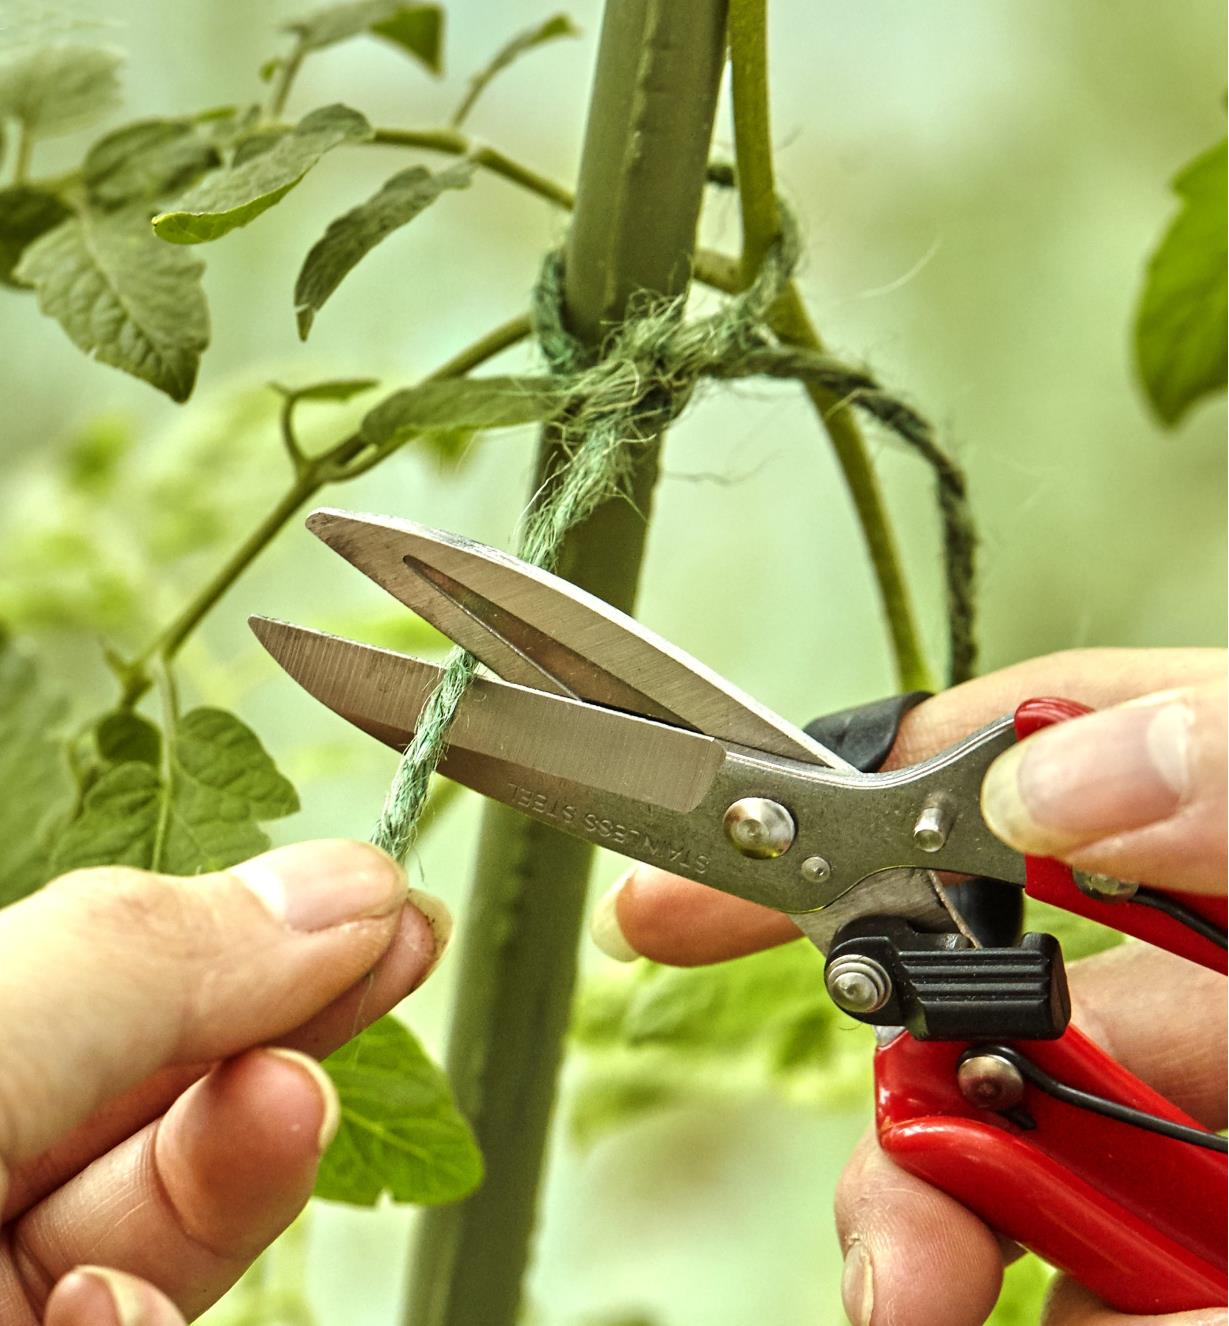 A gardener uses the ergonomic garden snips to trim a tag end of a piece of twine used as a plant tie